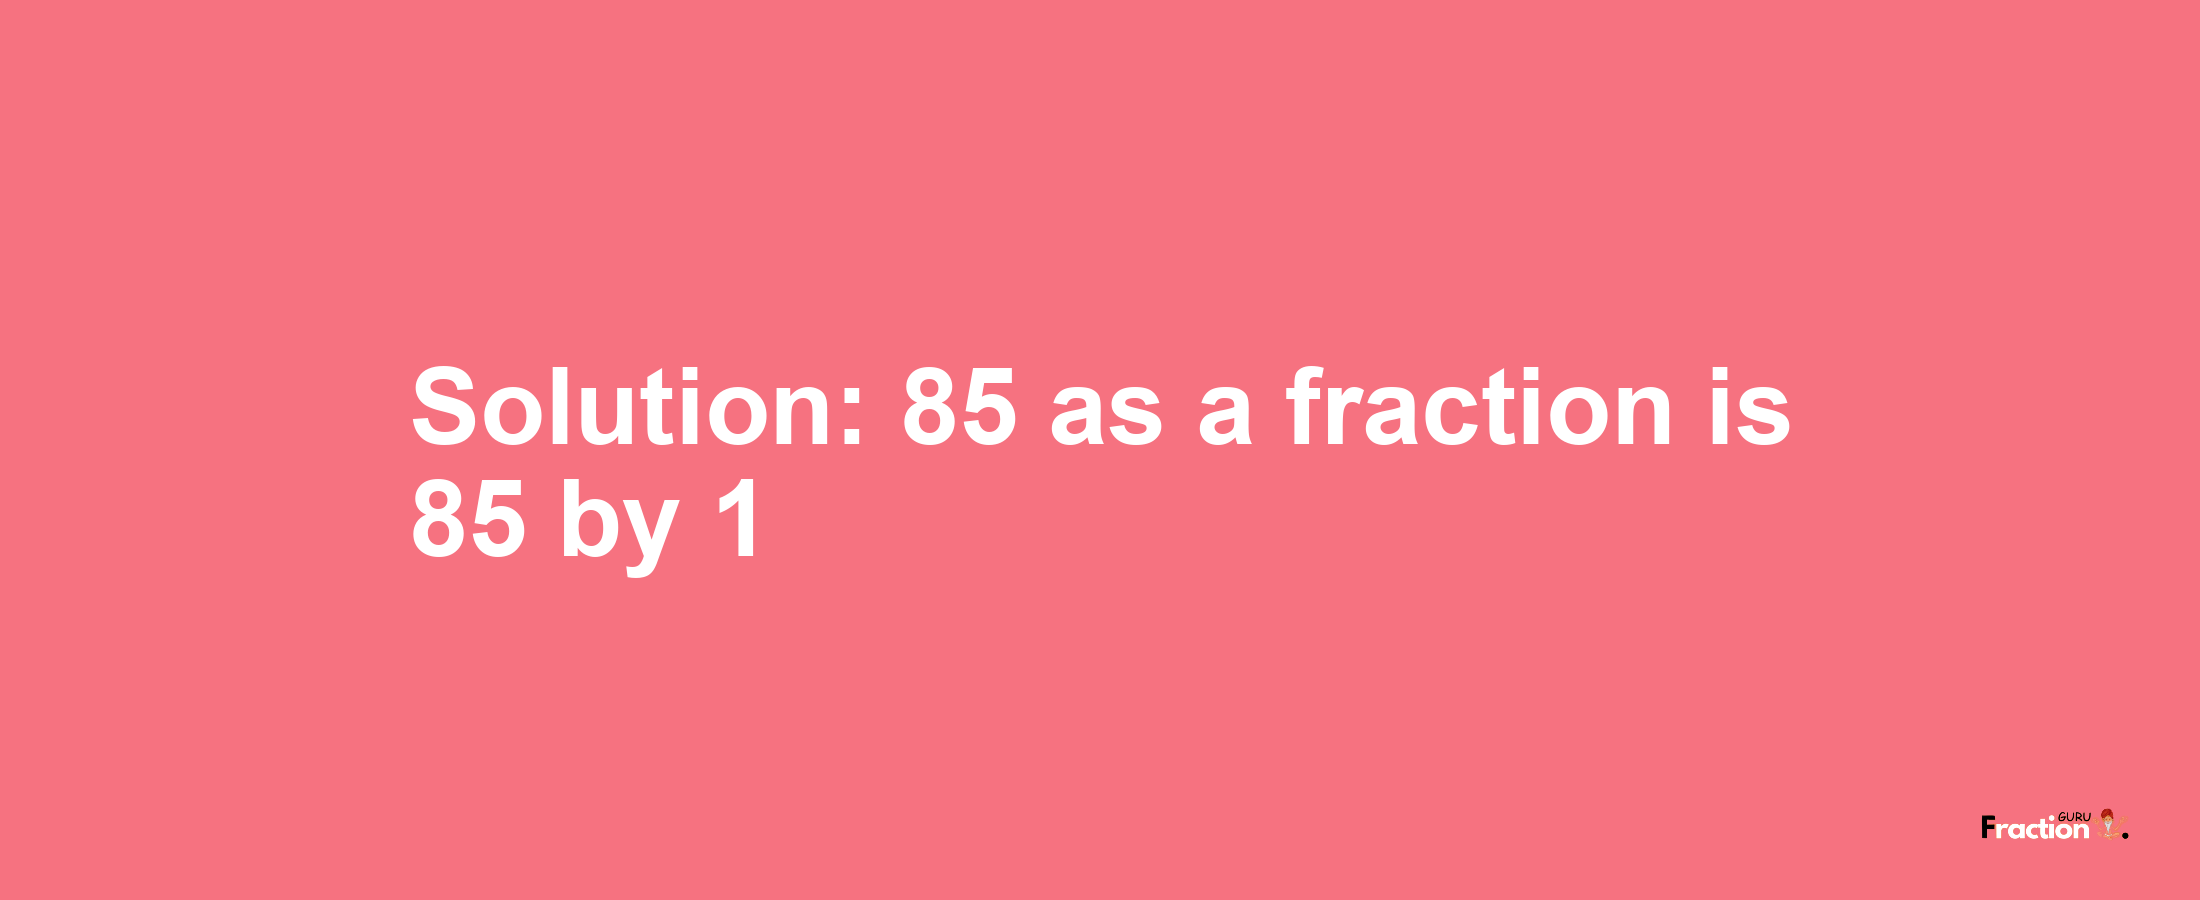 Solution:85 as a fraction is 85/1